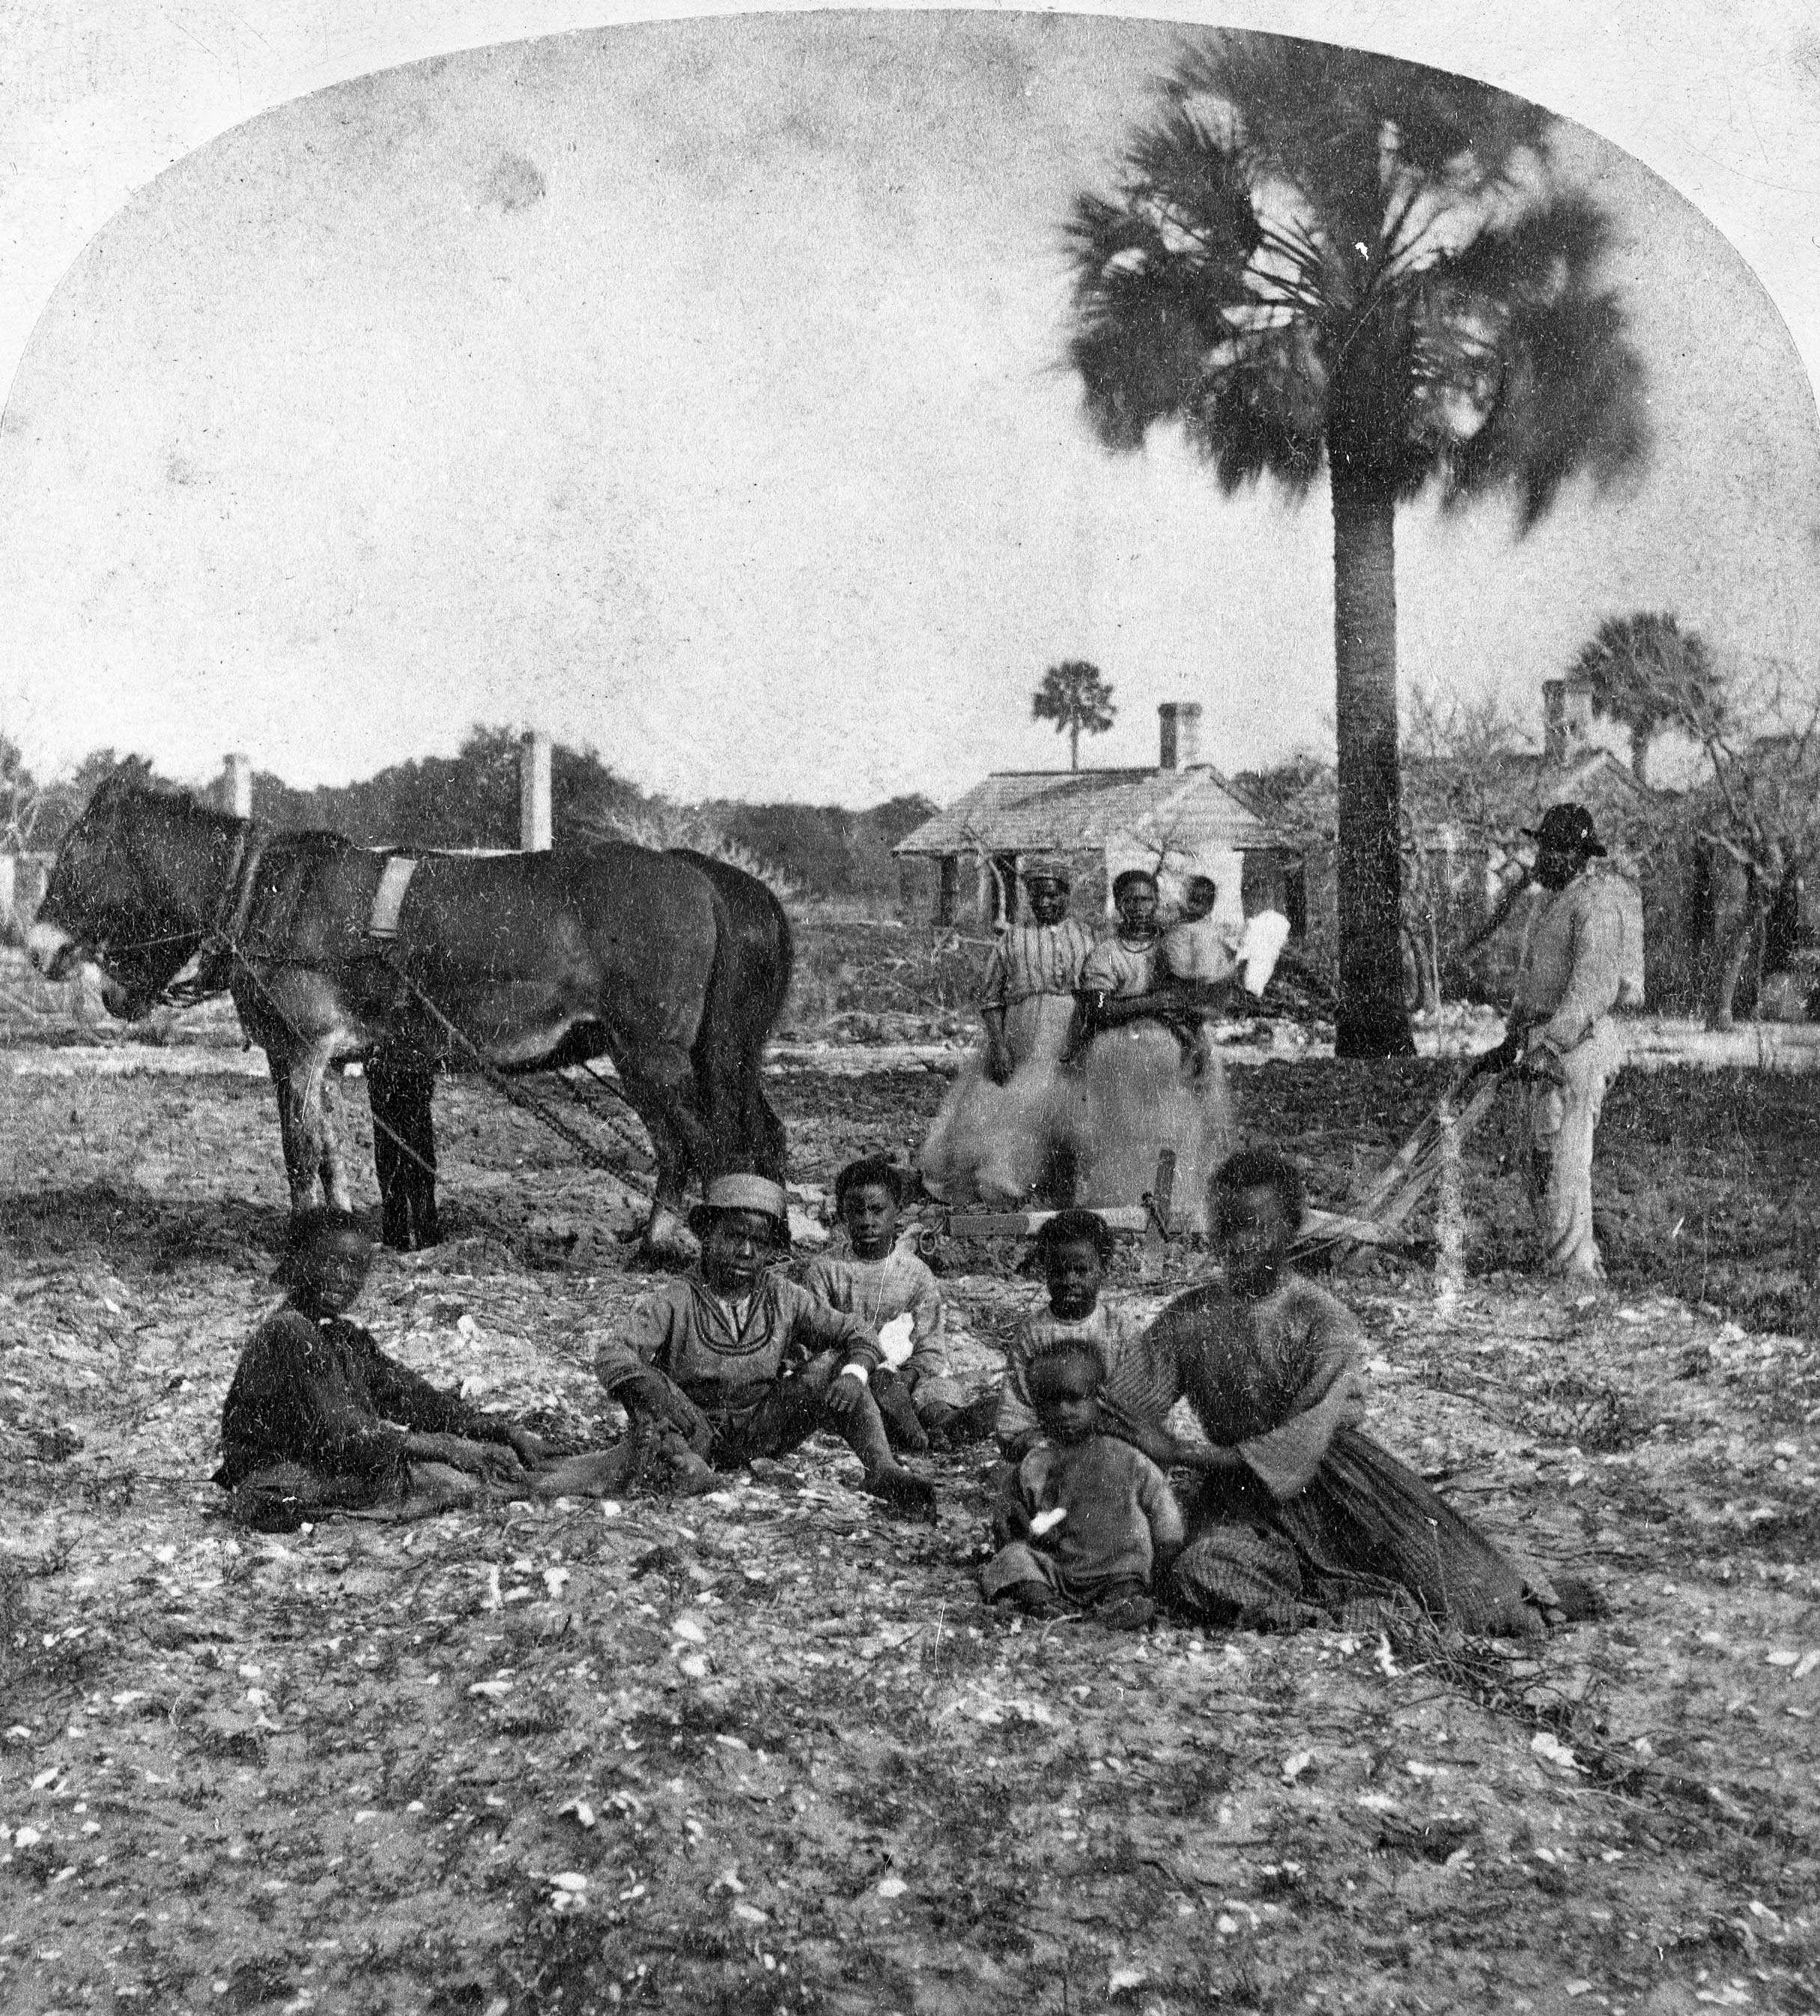 Black and white photograph of African-American family seated and standing in a field.  There are two horses attached to a plow and small houses in the background.